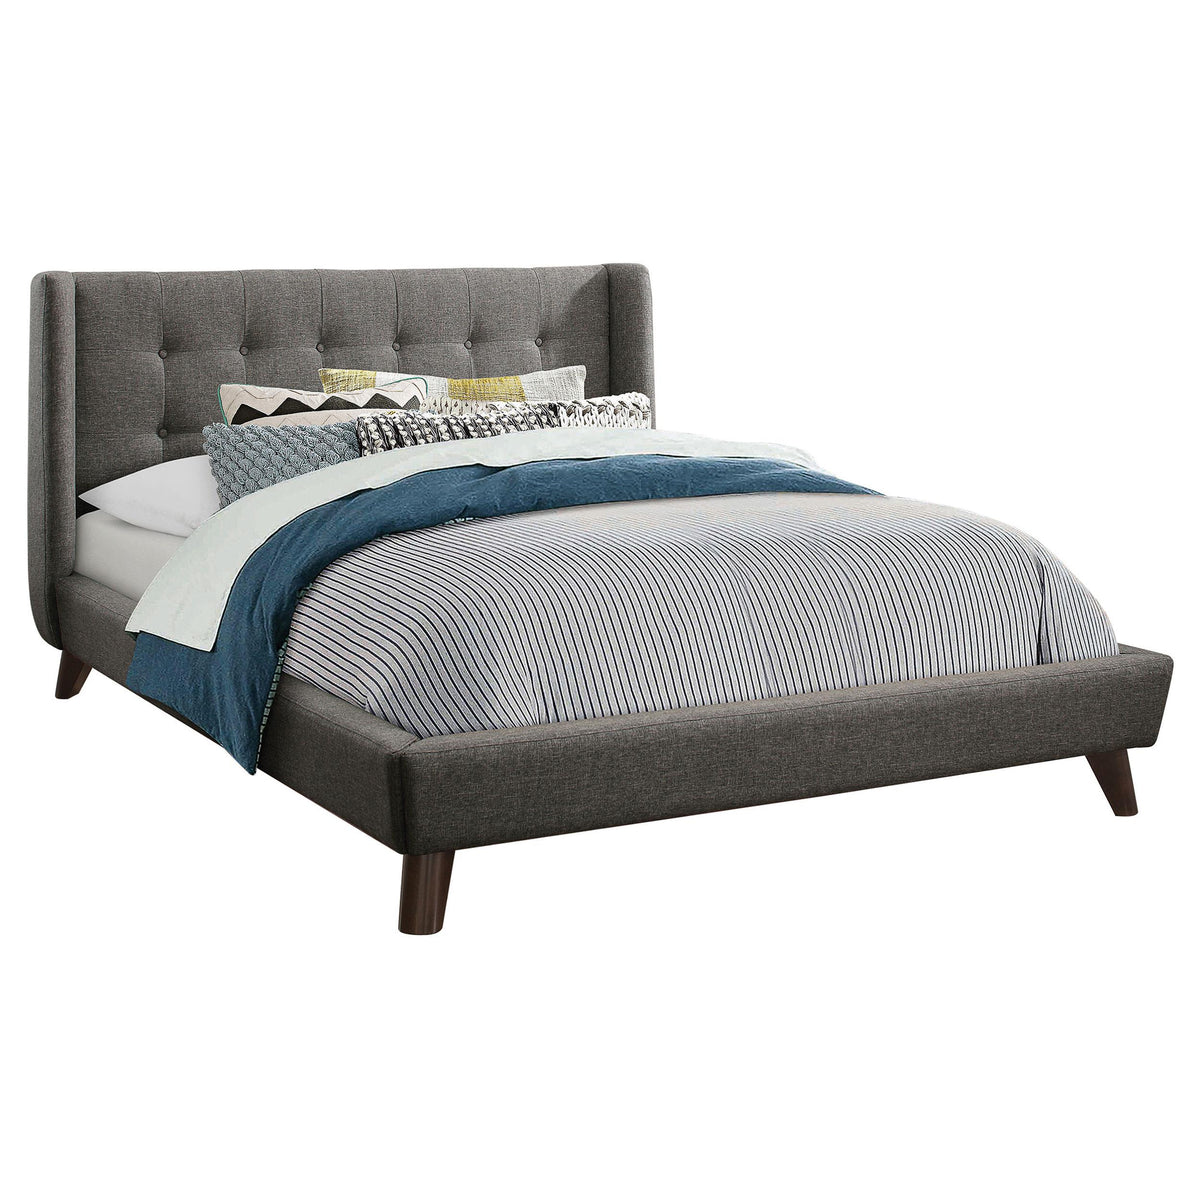 Carrington Button Tufted Full Bed Grey  Half Price Furniture